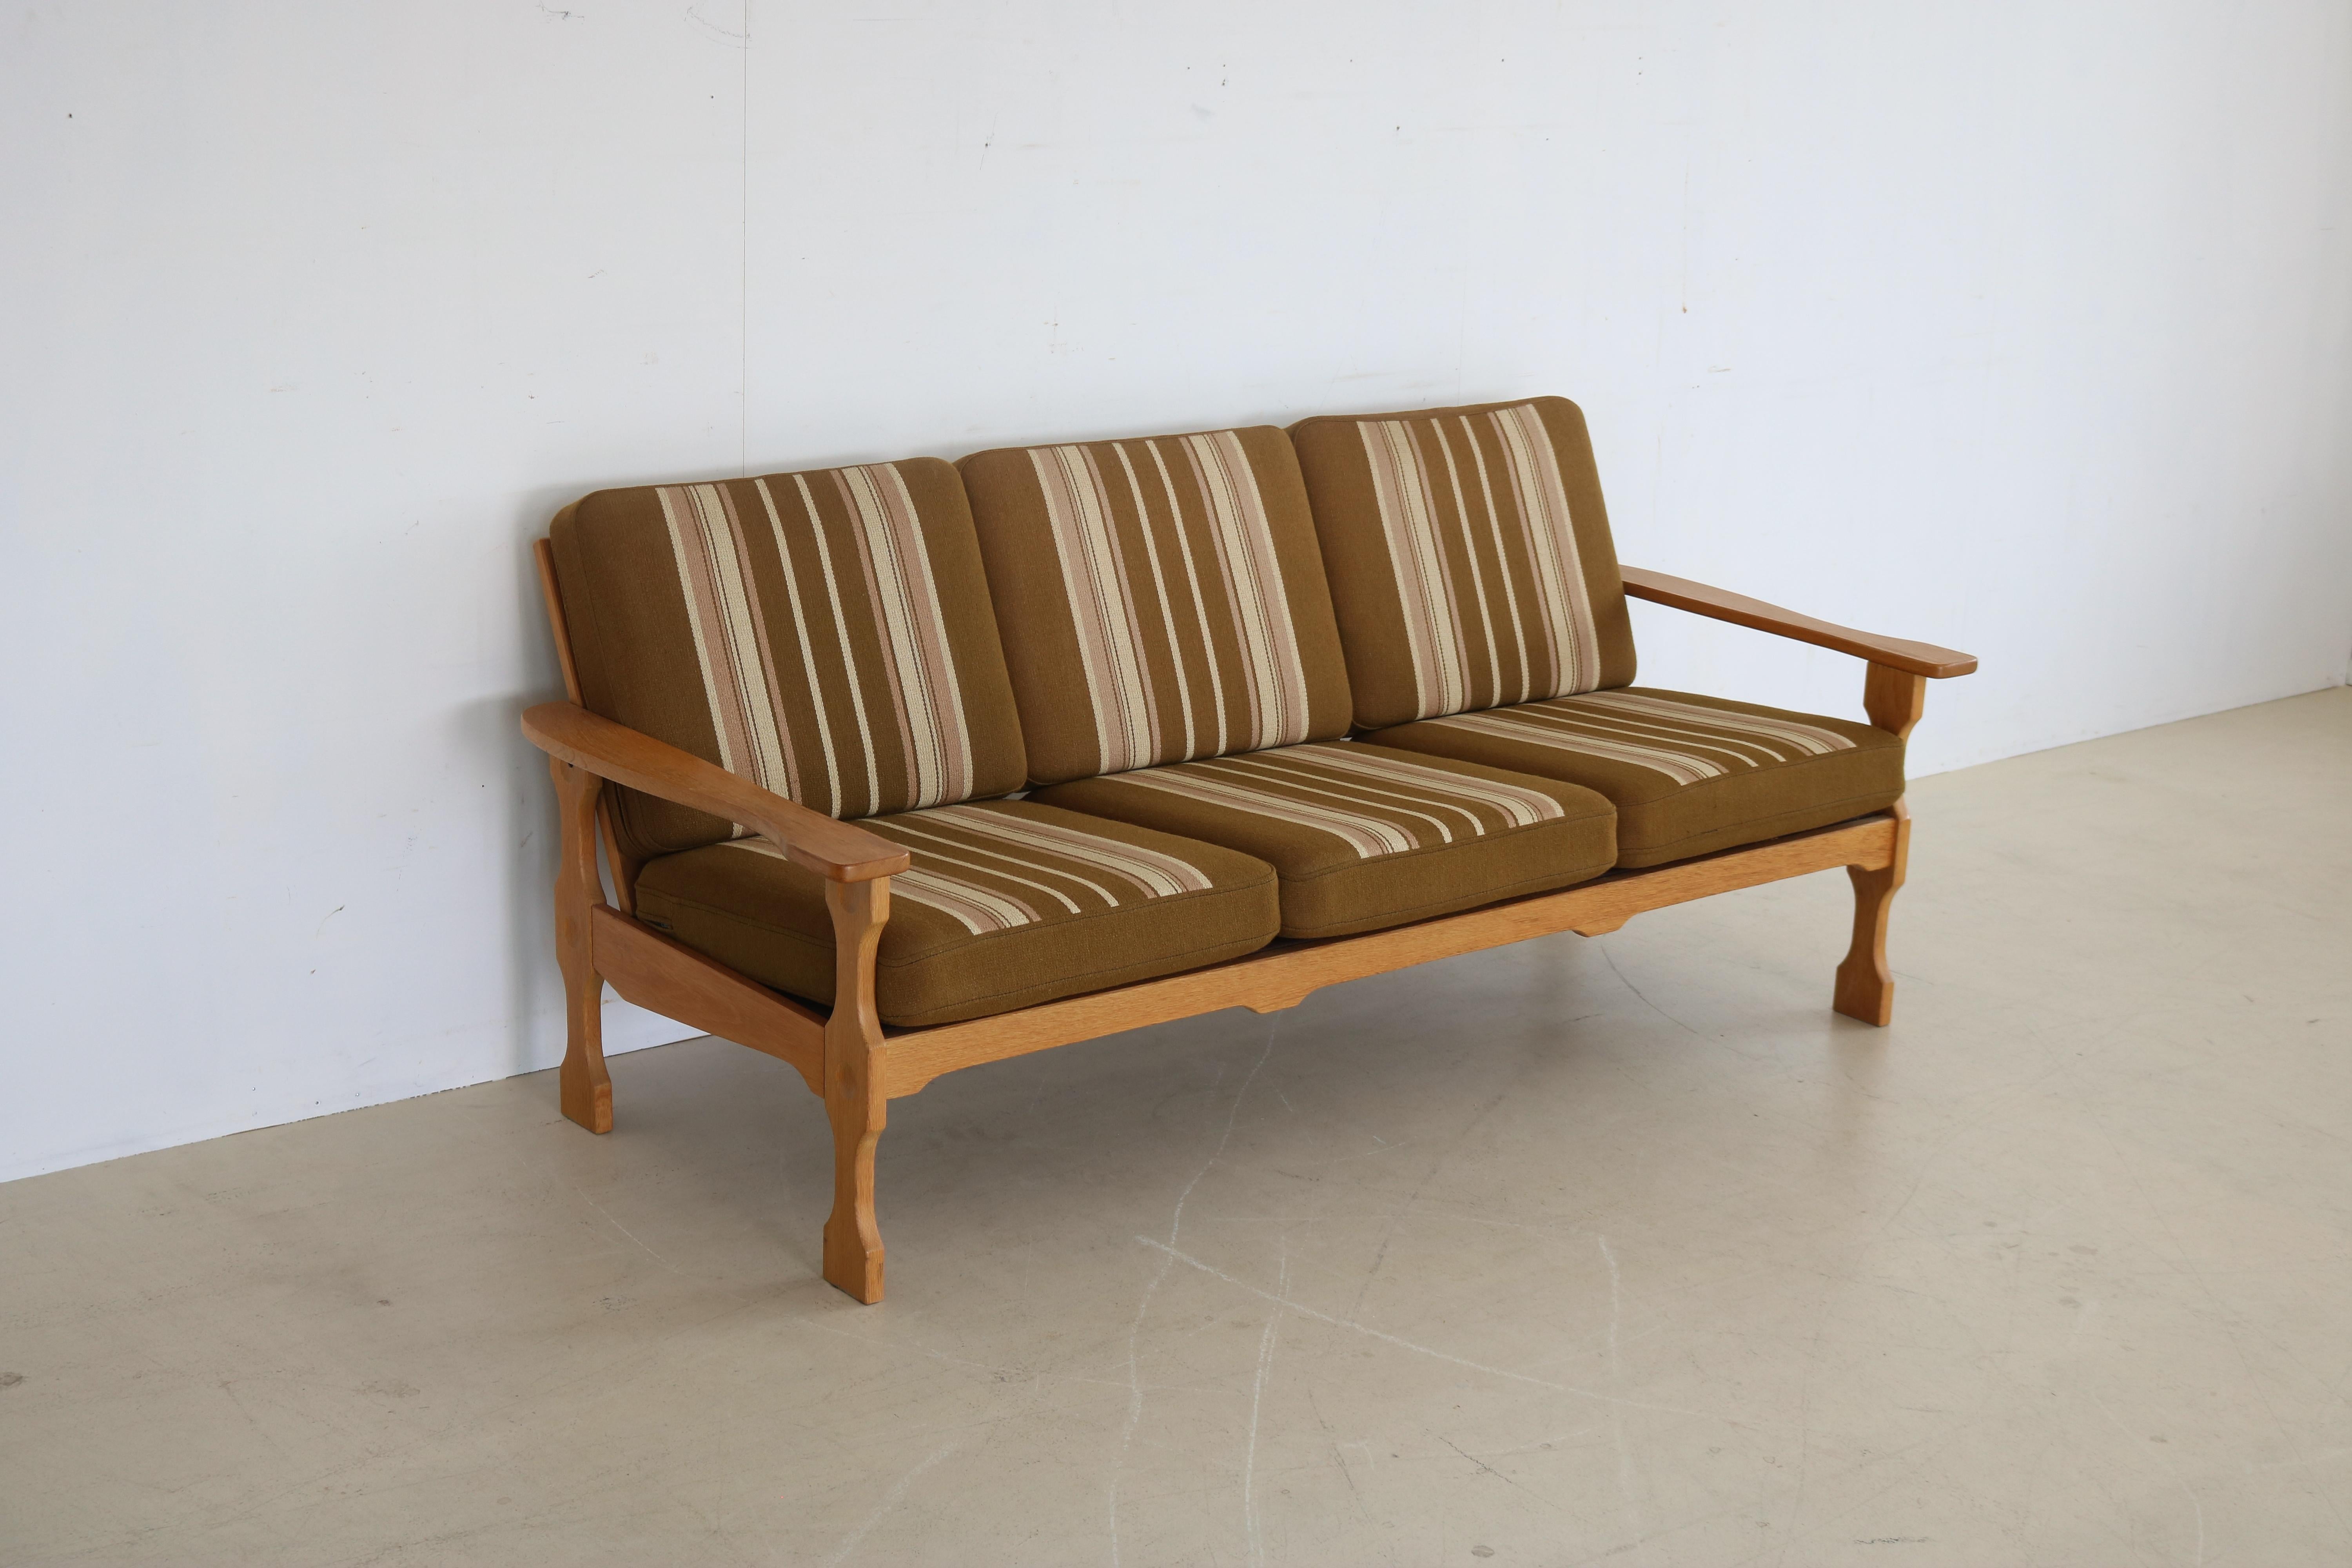 Vintage Oak Seating Area Couch Easy Chairs, 1950s, Danish In Good Condition For Sale In GRONINGEN, NL